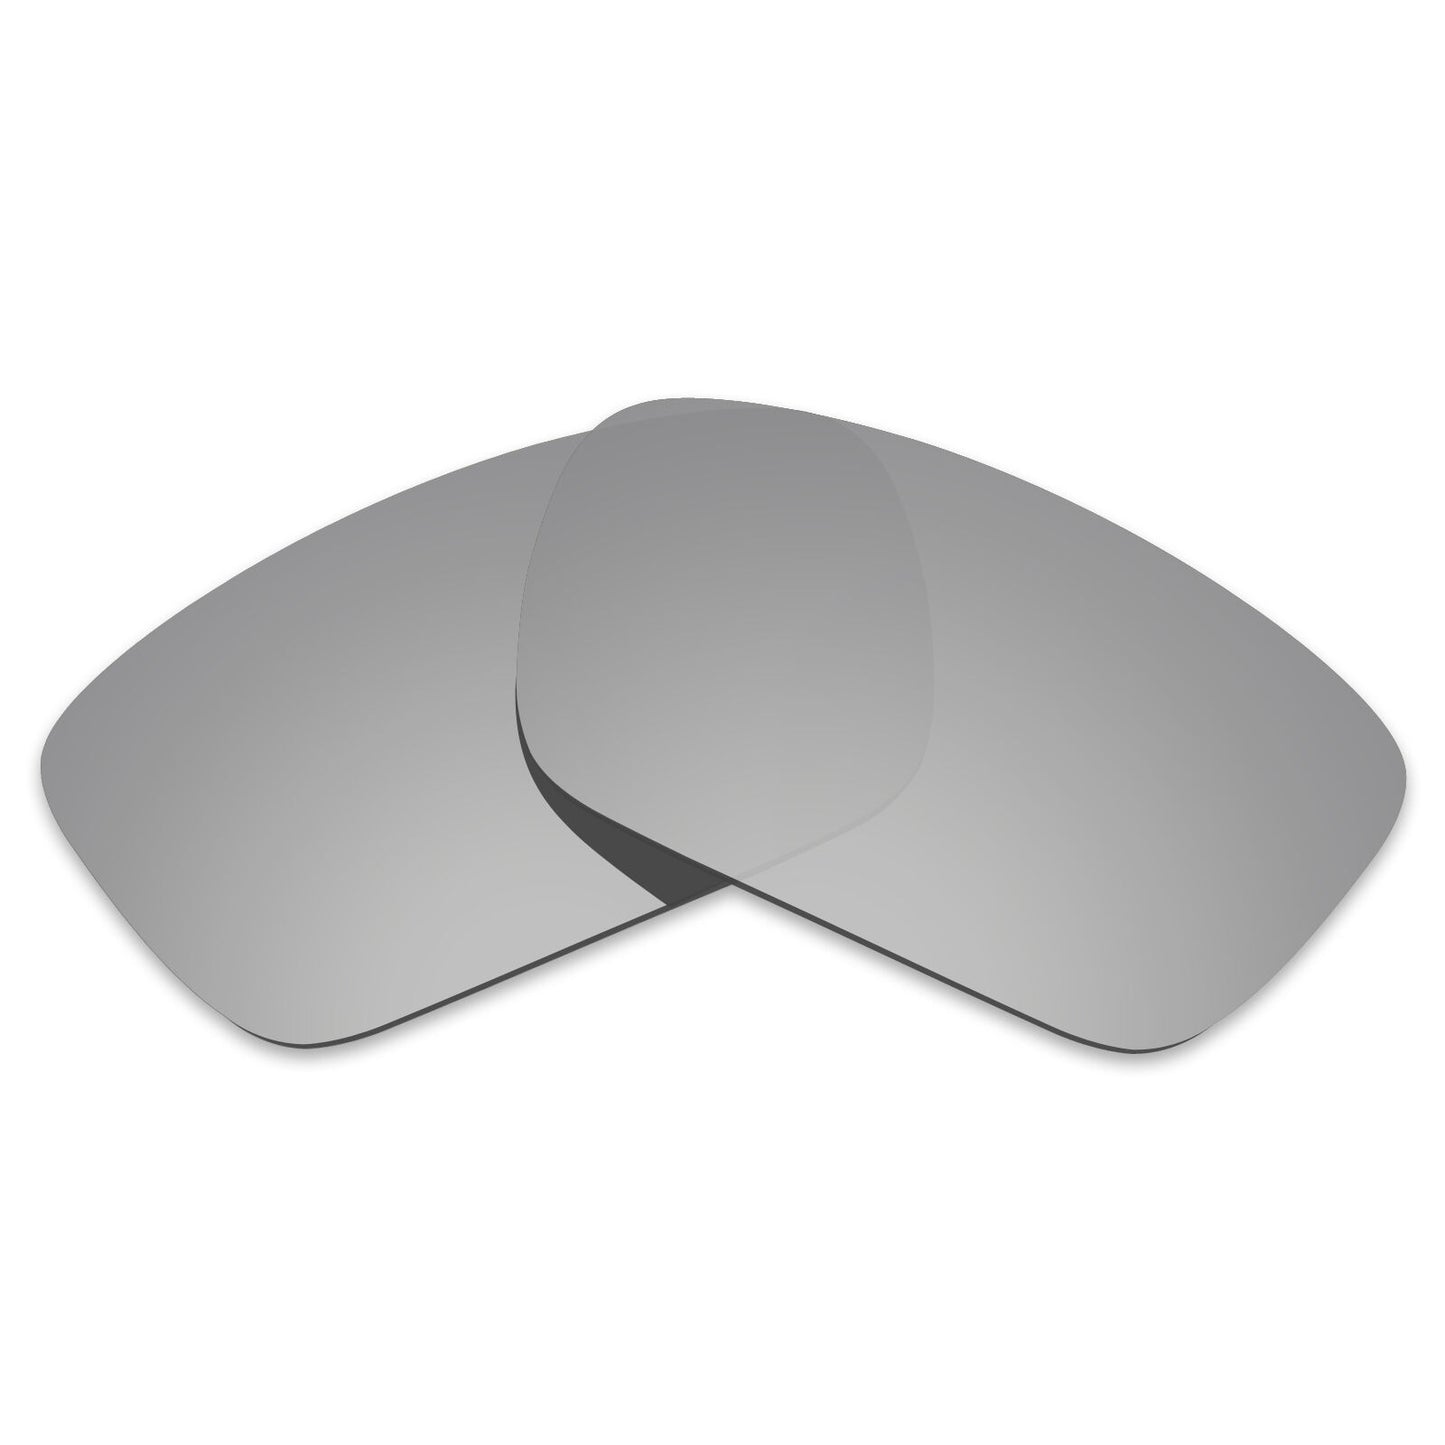 Hawkry Polarized Replacement Lens for-Oakley Fuel Cell Sunglass Silver Mirror